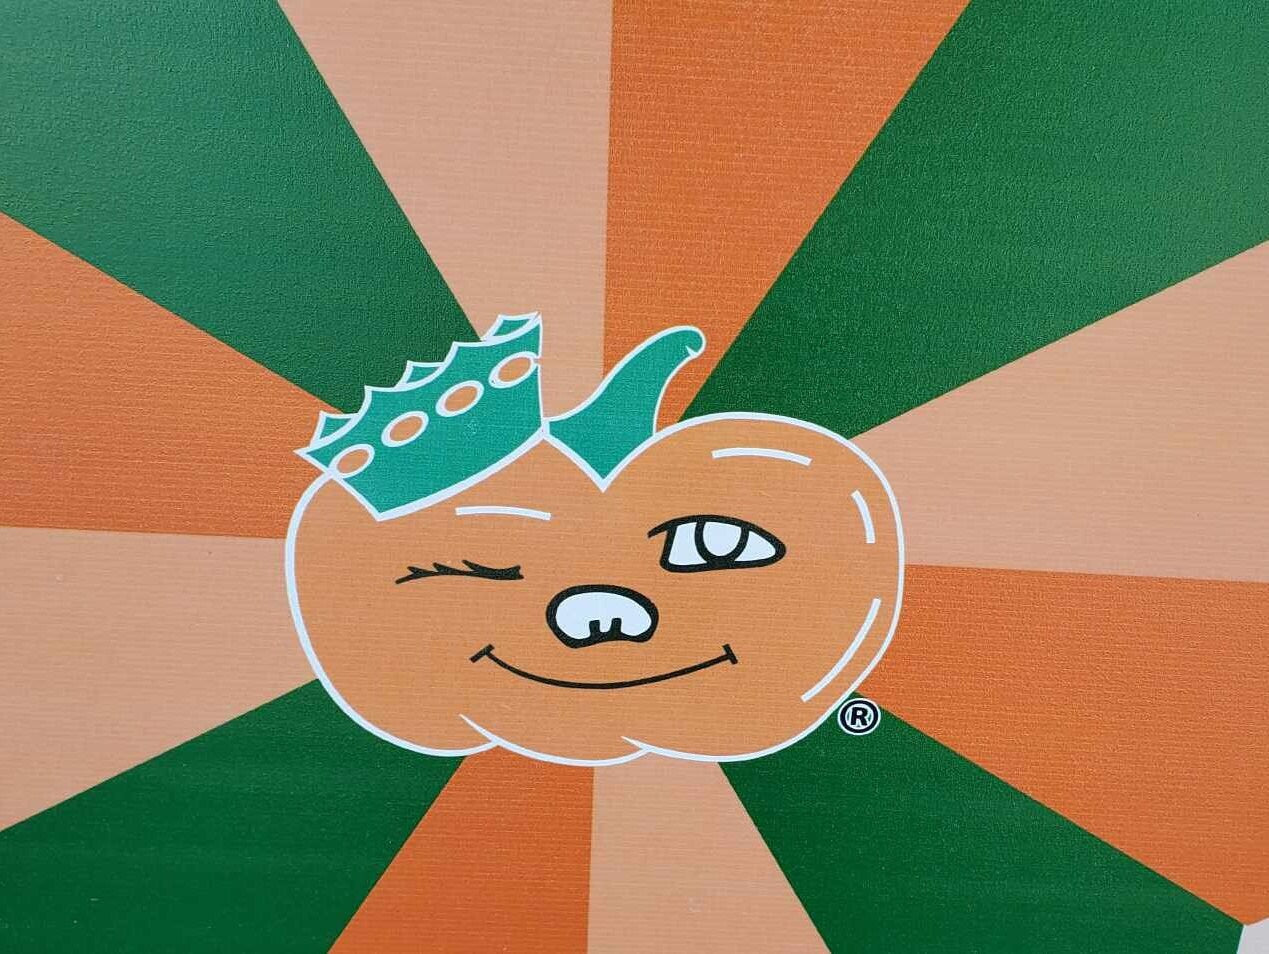 Ohio Winky Pumpkin Heart of it all Small Town Barn Quilt Mascot Farm Decor Orange and Green Whitewash Wooden Wood Hang in Garden Star Flower